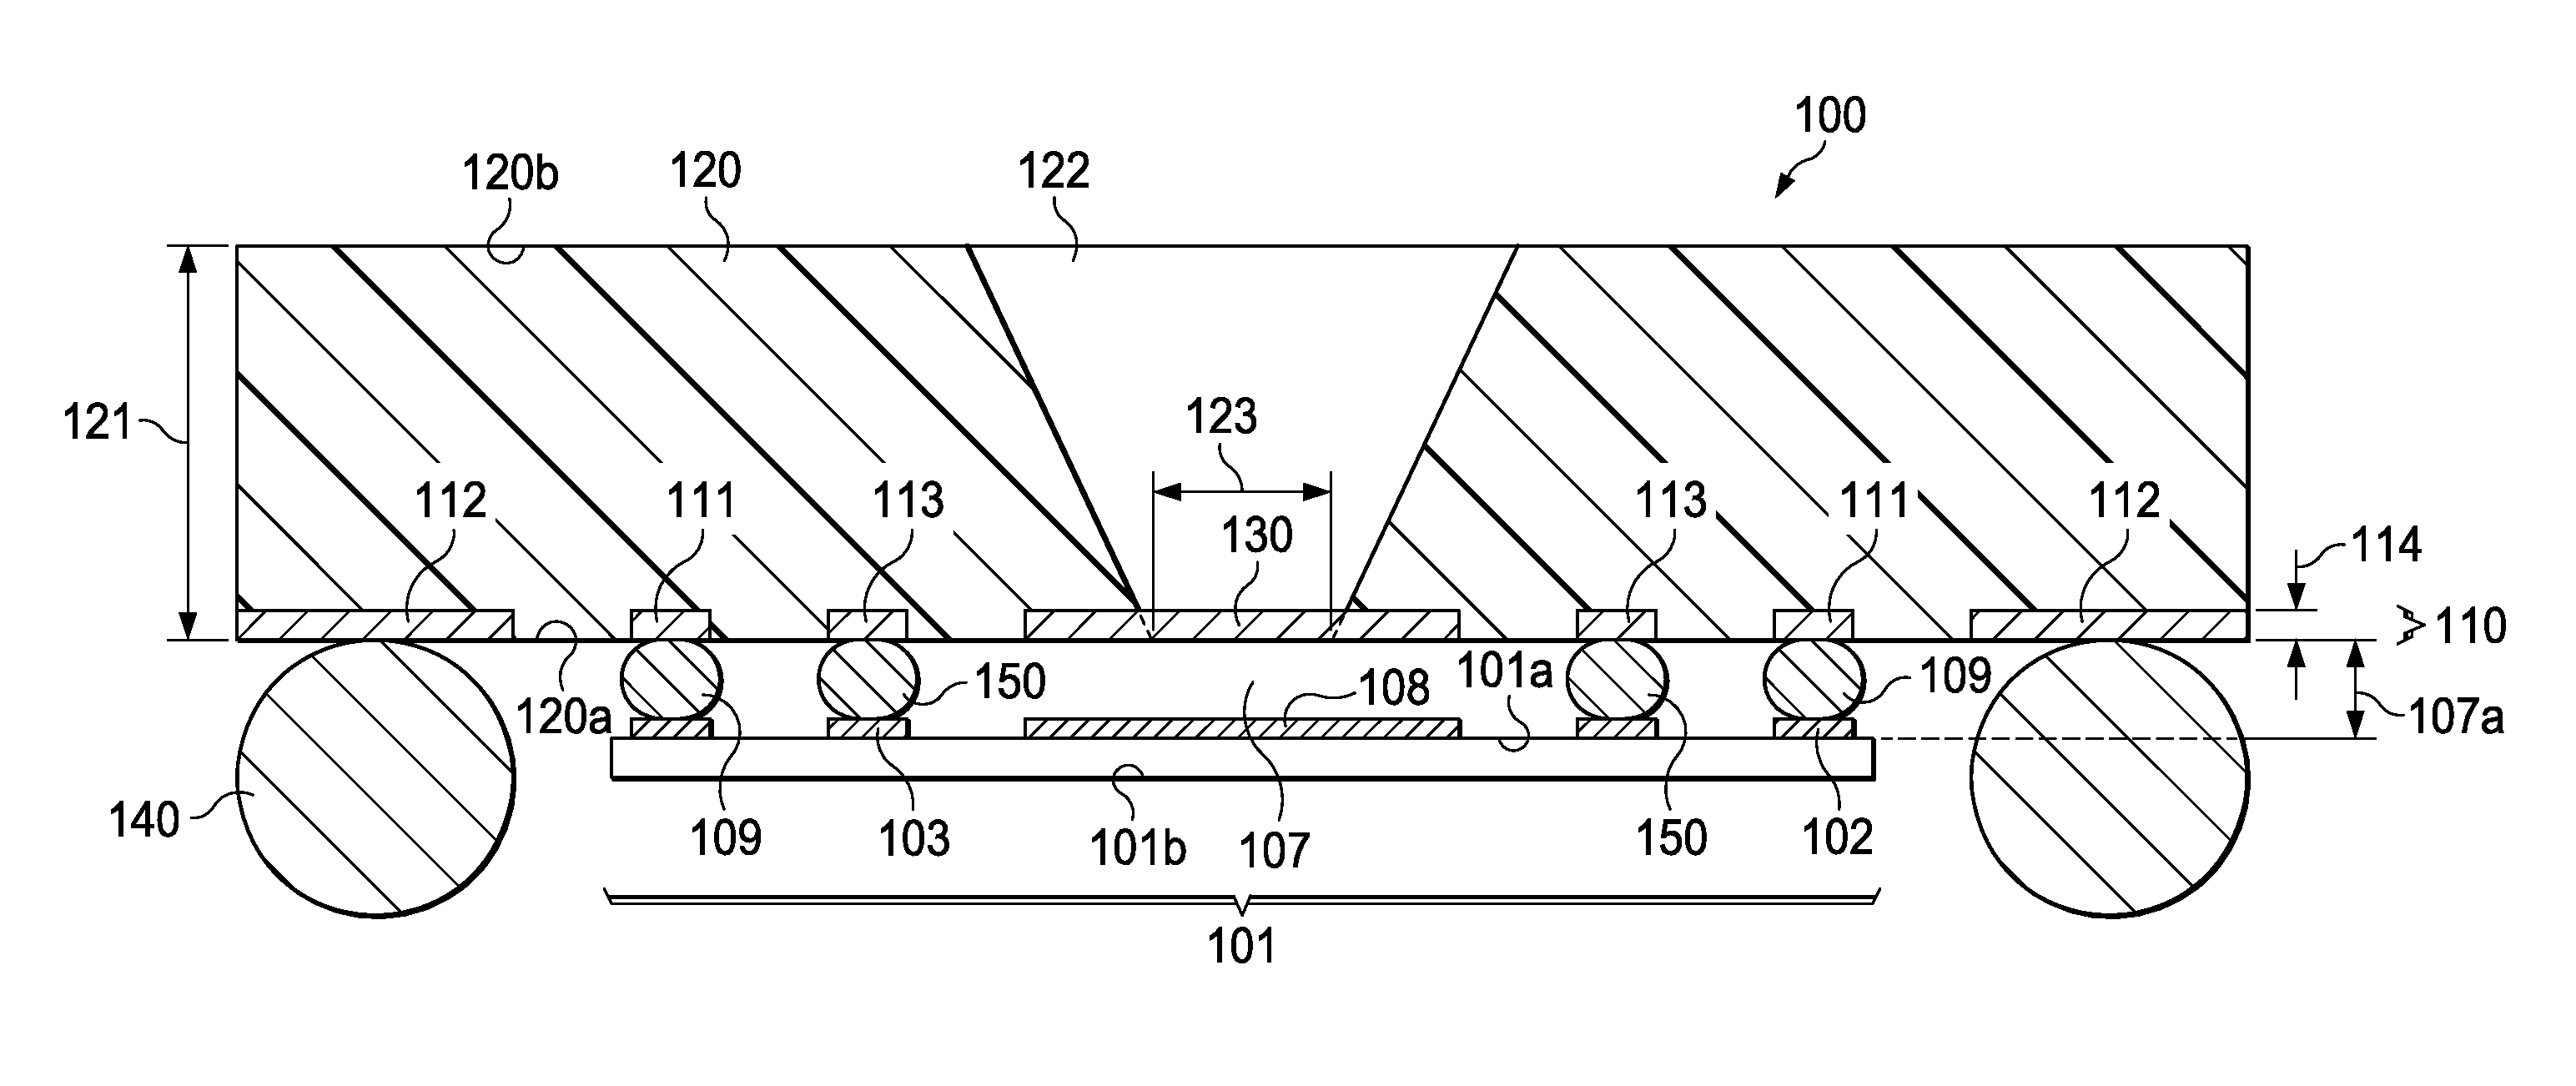 Micro-Electro-Mechanical System Having Movable Element Integrated into Leadframe-Based Package